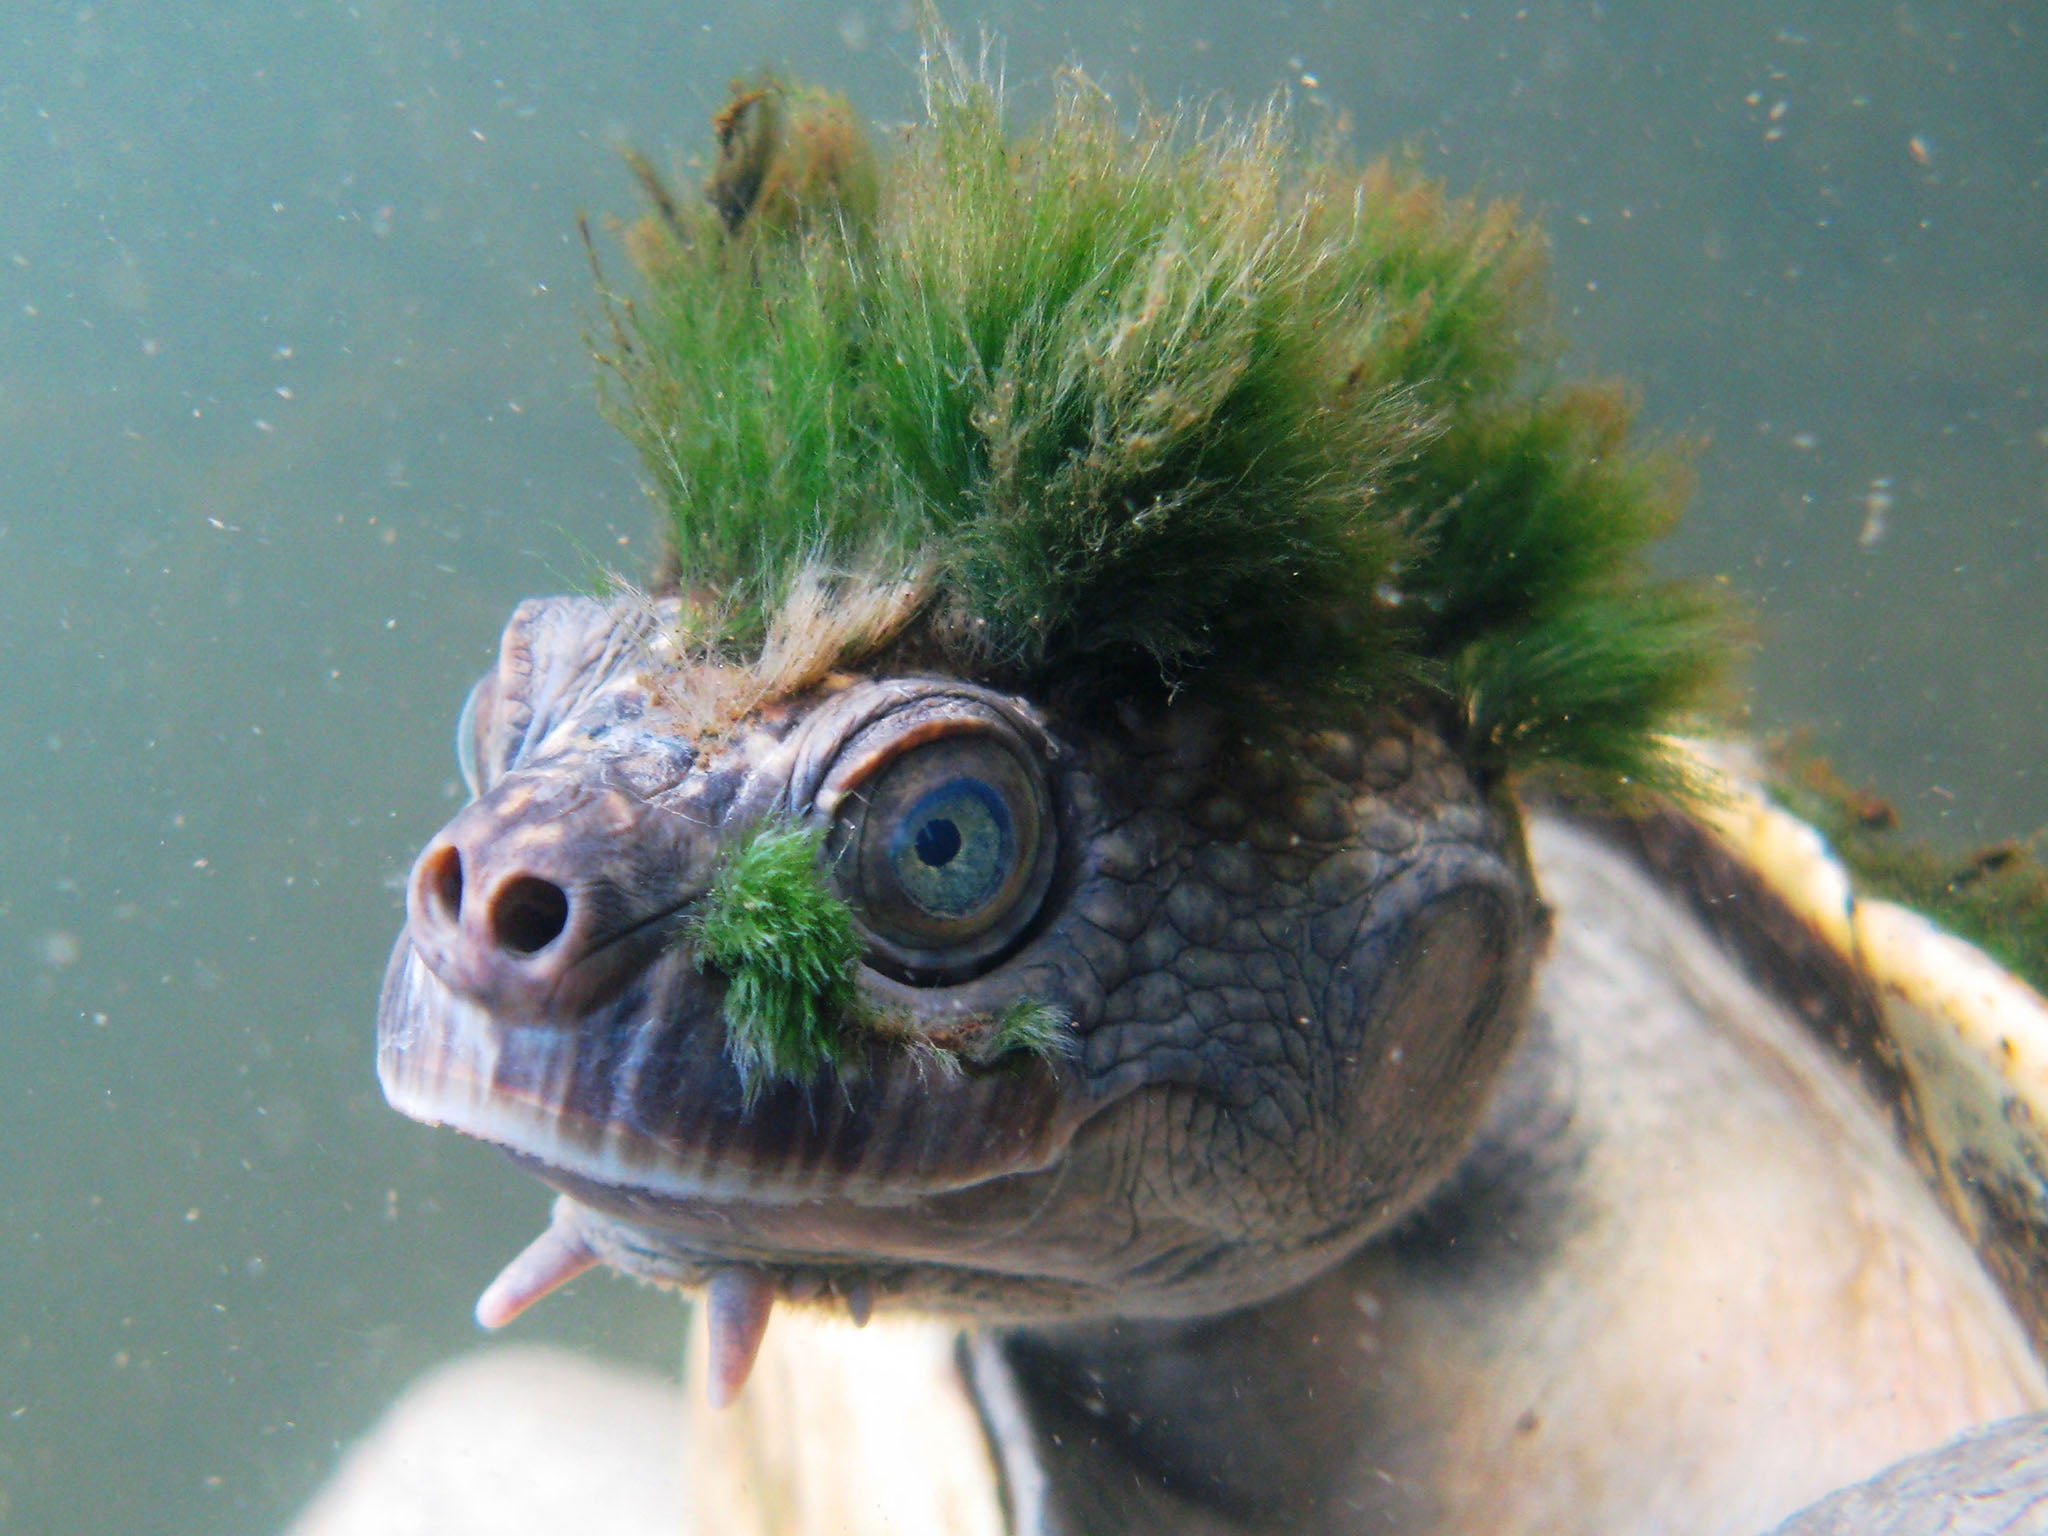 The Mary River turtle is one of hundreds of species on the new ZSL's Evolutionarily Distinct and Globally Endangered Reptiles list.